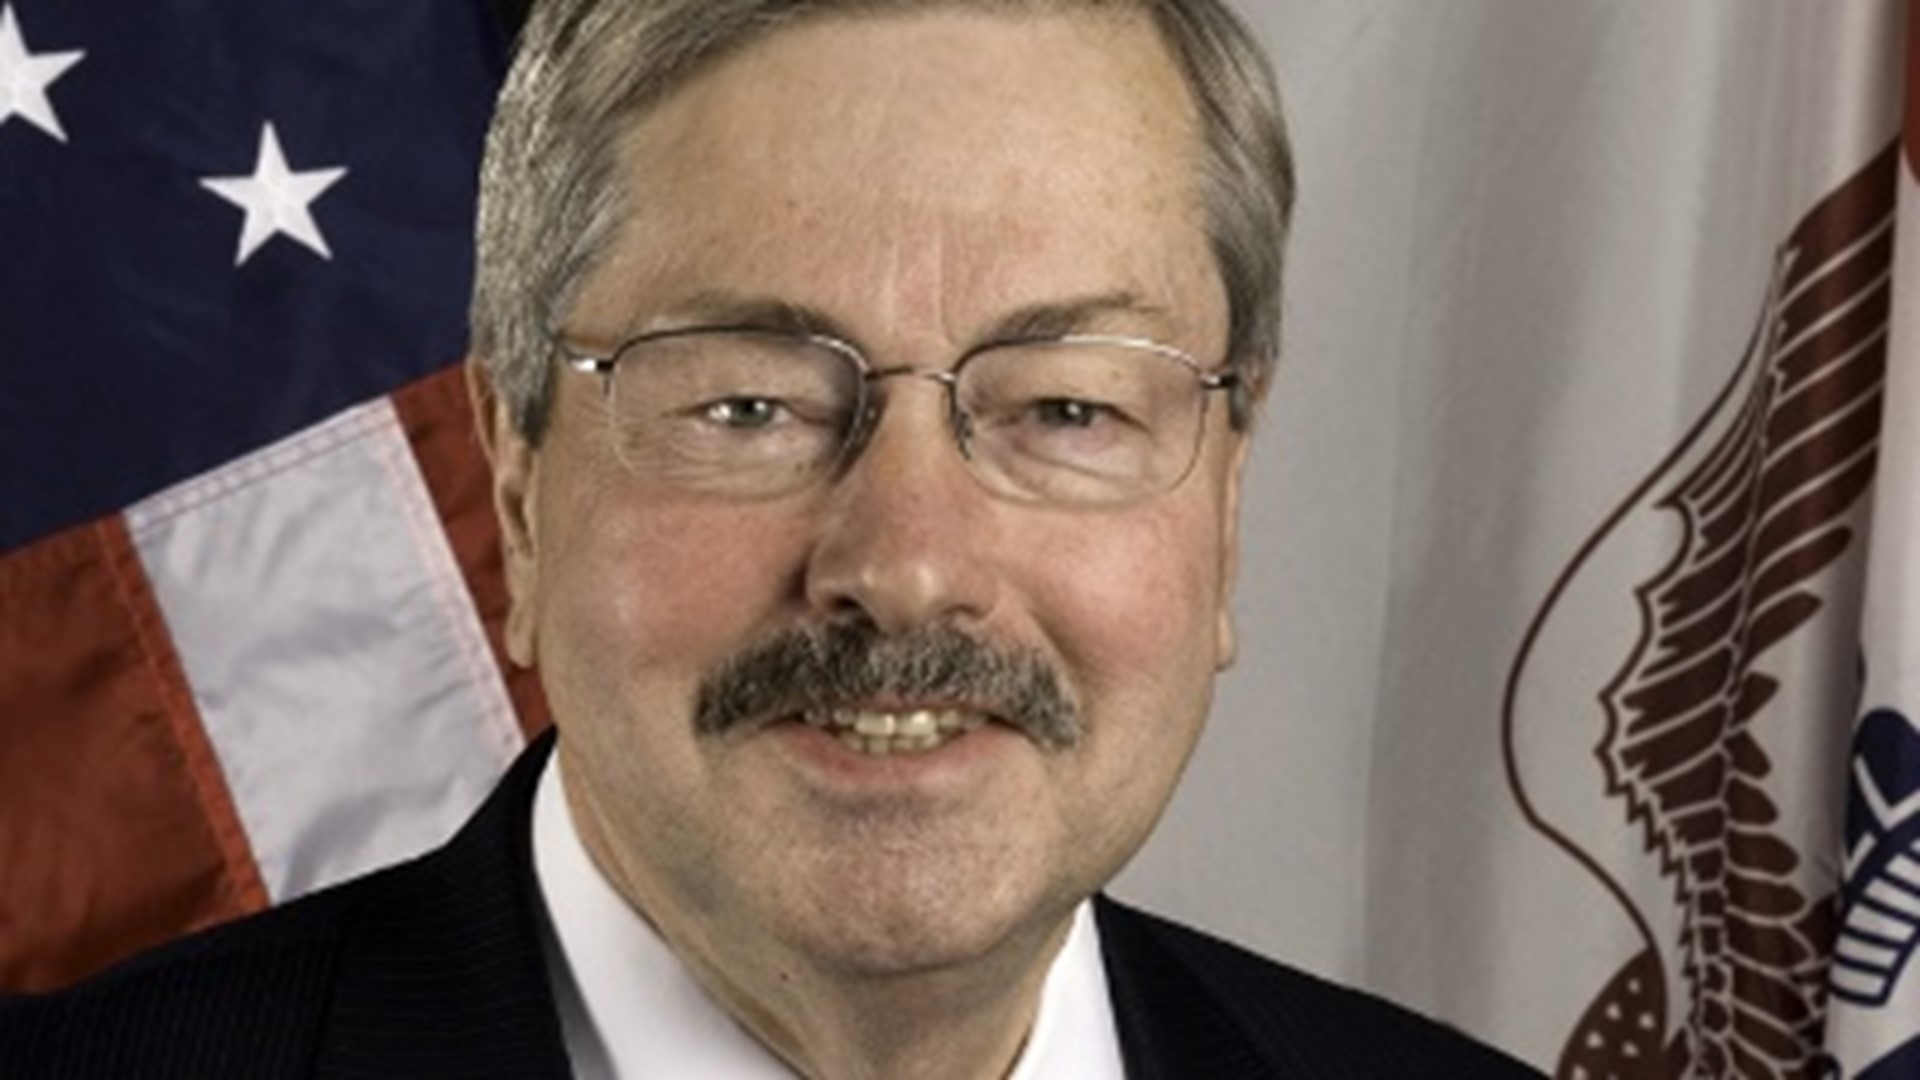 As the longest-serving governor in the history of Iowa and the the United States as a whole, Branstad played an integral part in creating the Iowa Hunger Summit.